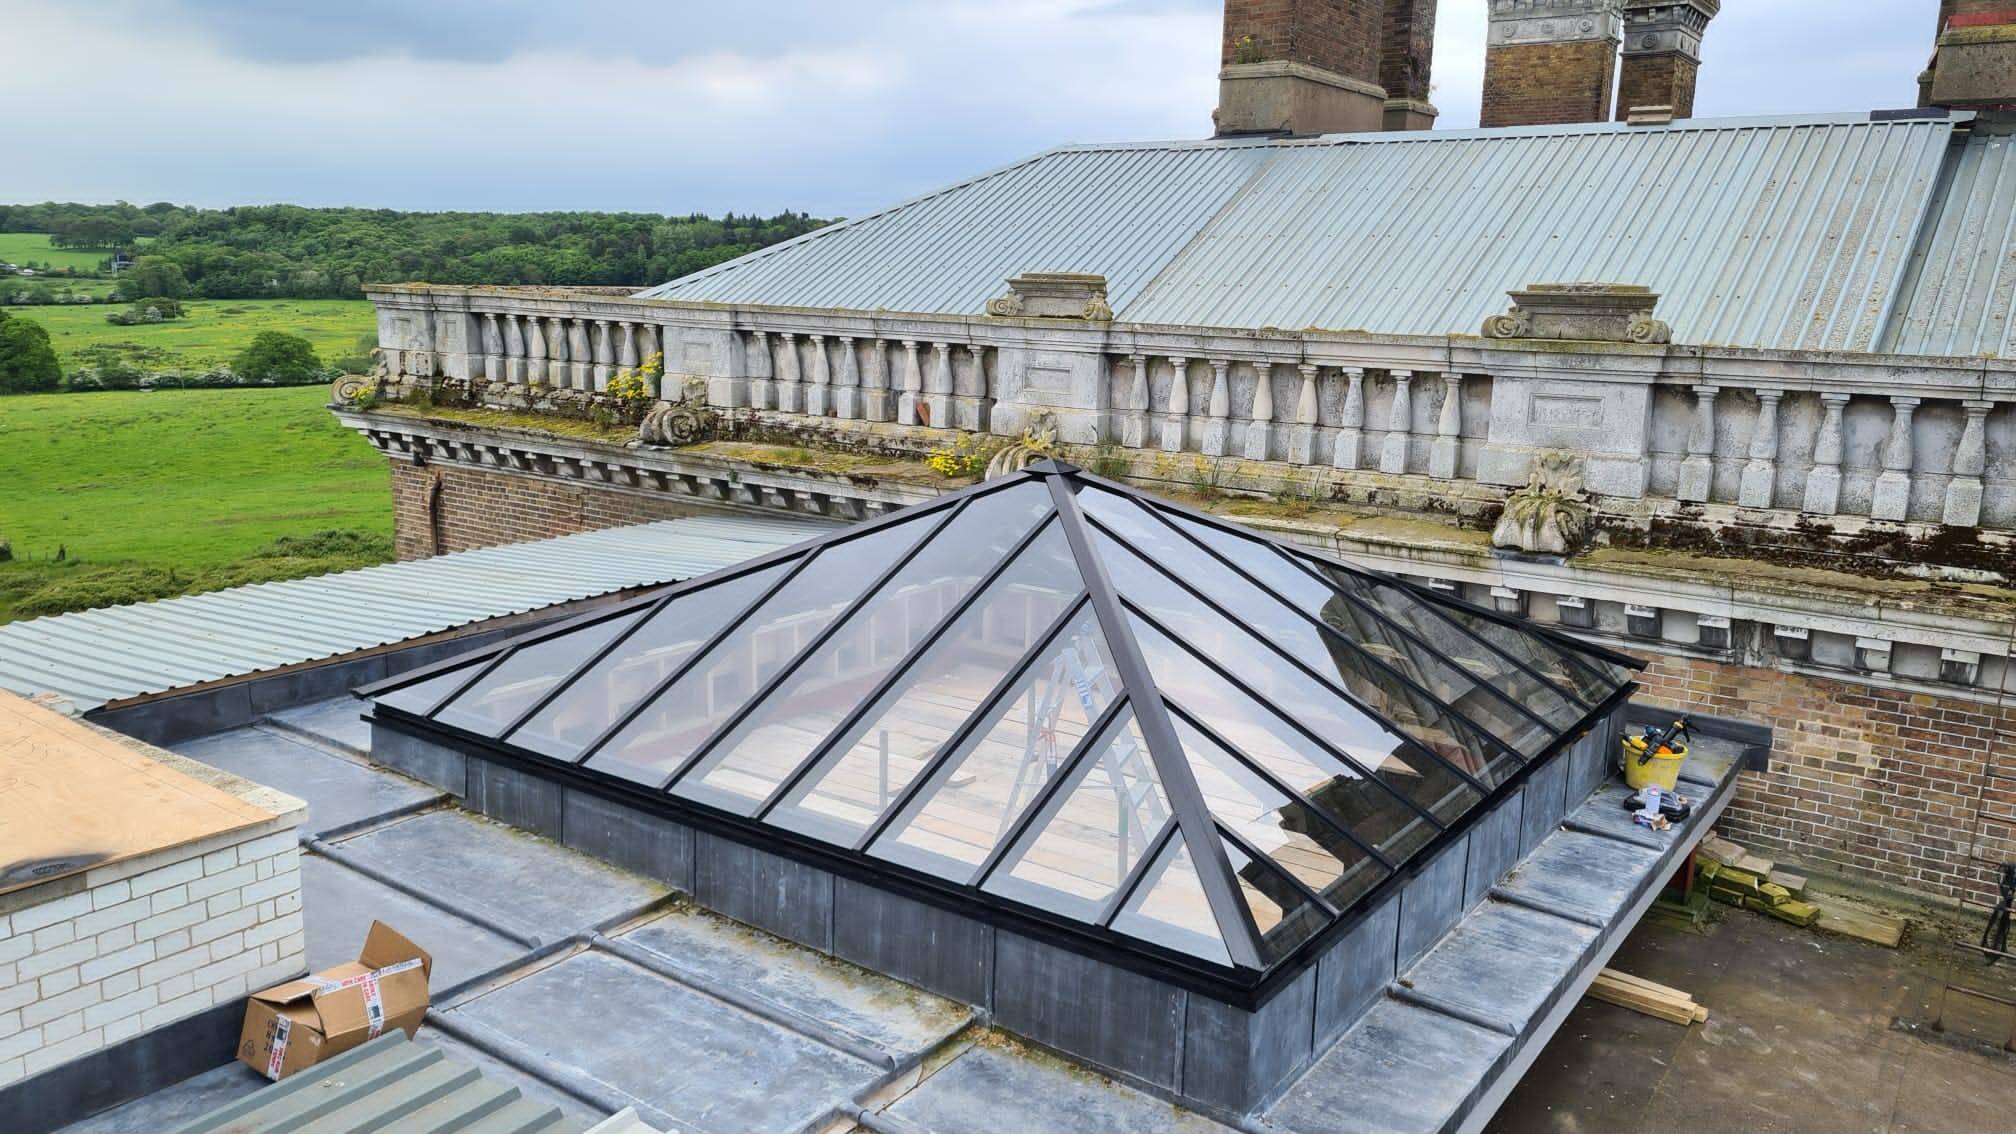 Skylight - Shaped and pitched rooflights